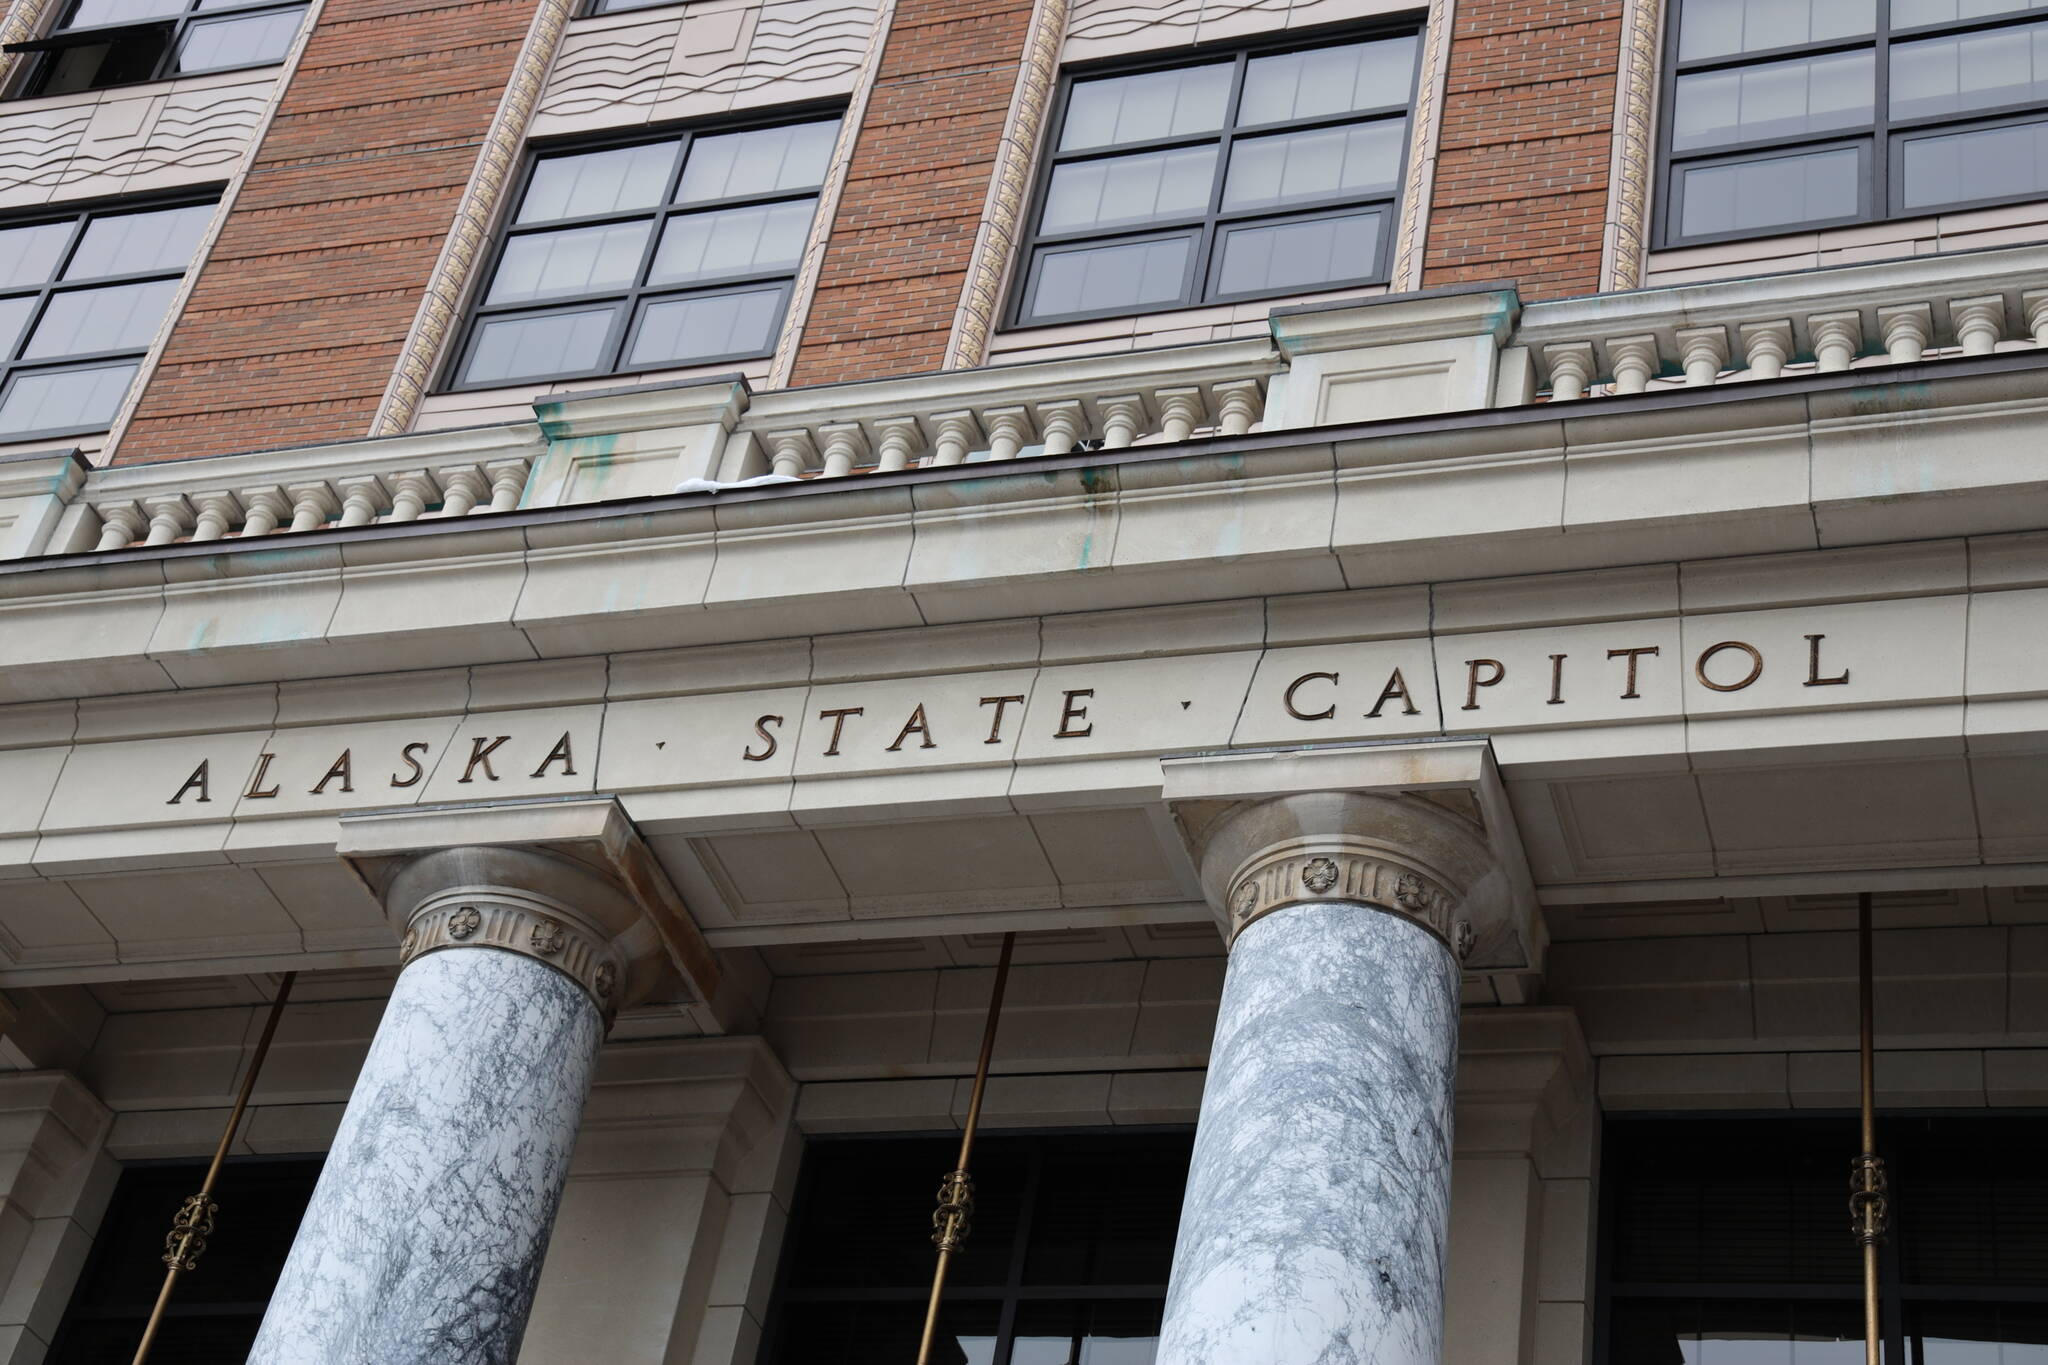 Legislators are about 50 days through the statutory 90-day limit for the session at the Alaska State Capitol, although in reality they are expected to meet for at least the 121 days allowed in Alaska’s Constitution. (Clarise Larson / Juneau Empire File)